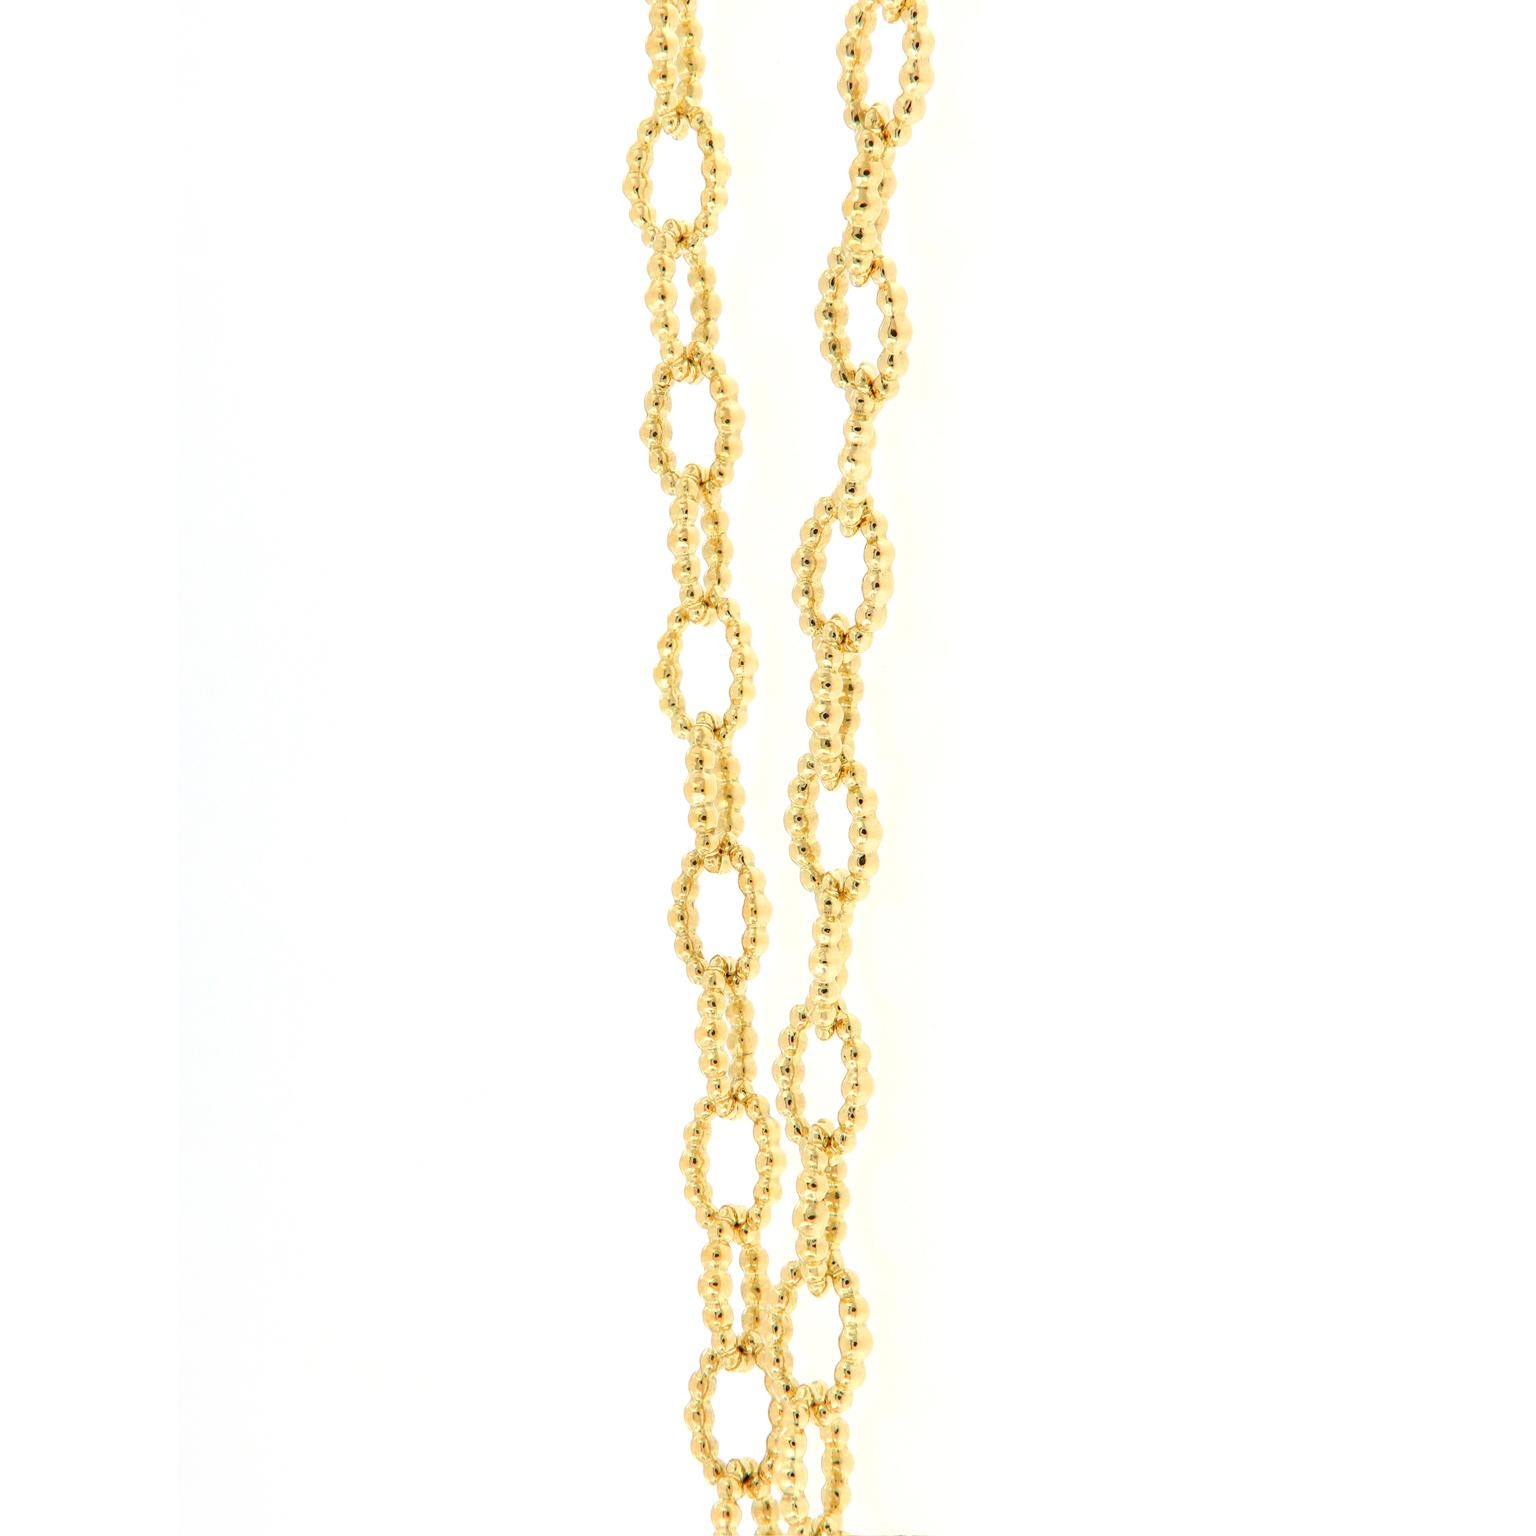 Lagos’s signature link necklace from the Caviar Collection is crafted in 18k yellow gold. This 32-inch necklace easily adjusts to various lengths. Finished with a signature lobster clasp. Weighs 37.8 grams.
Marked Lagos.